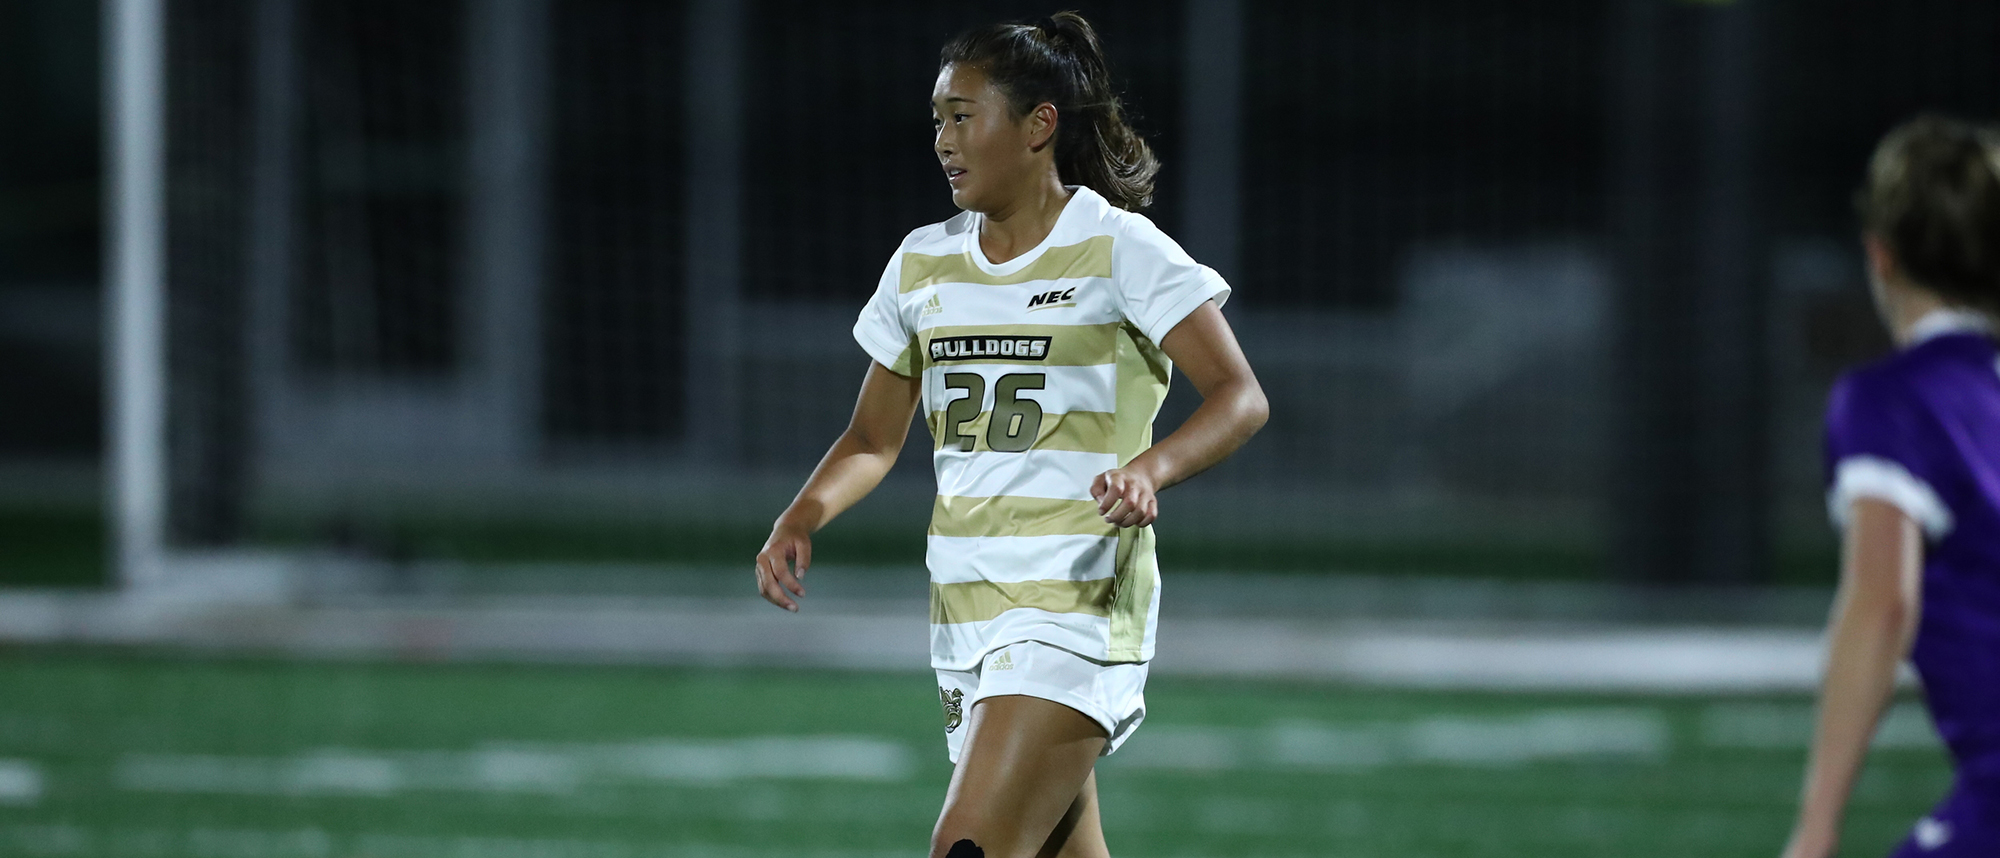 Diani scores first career goal in draw with CCSU